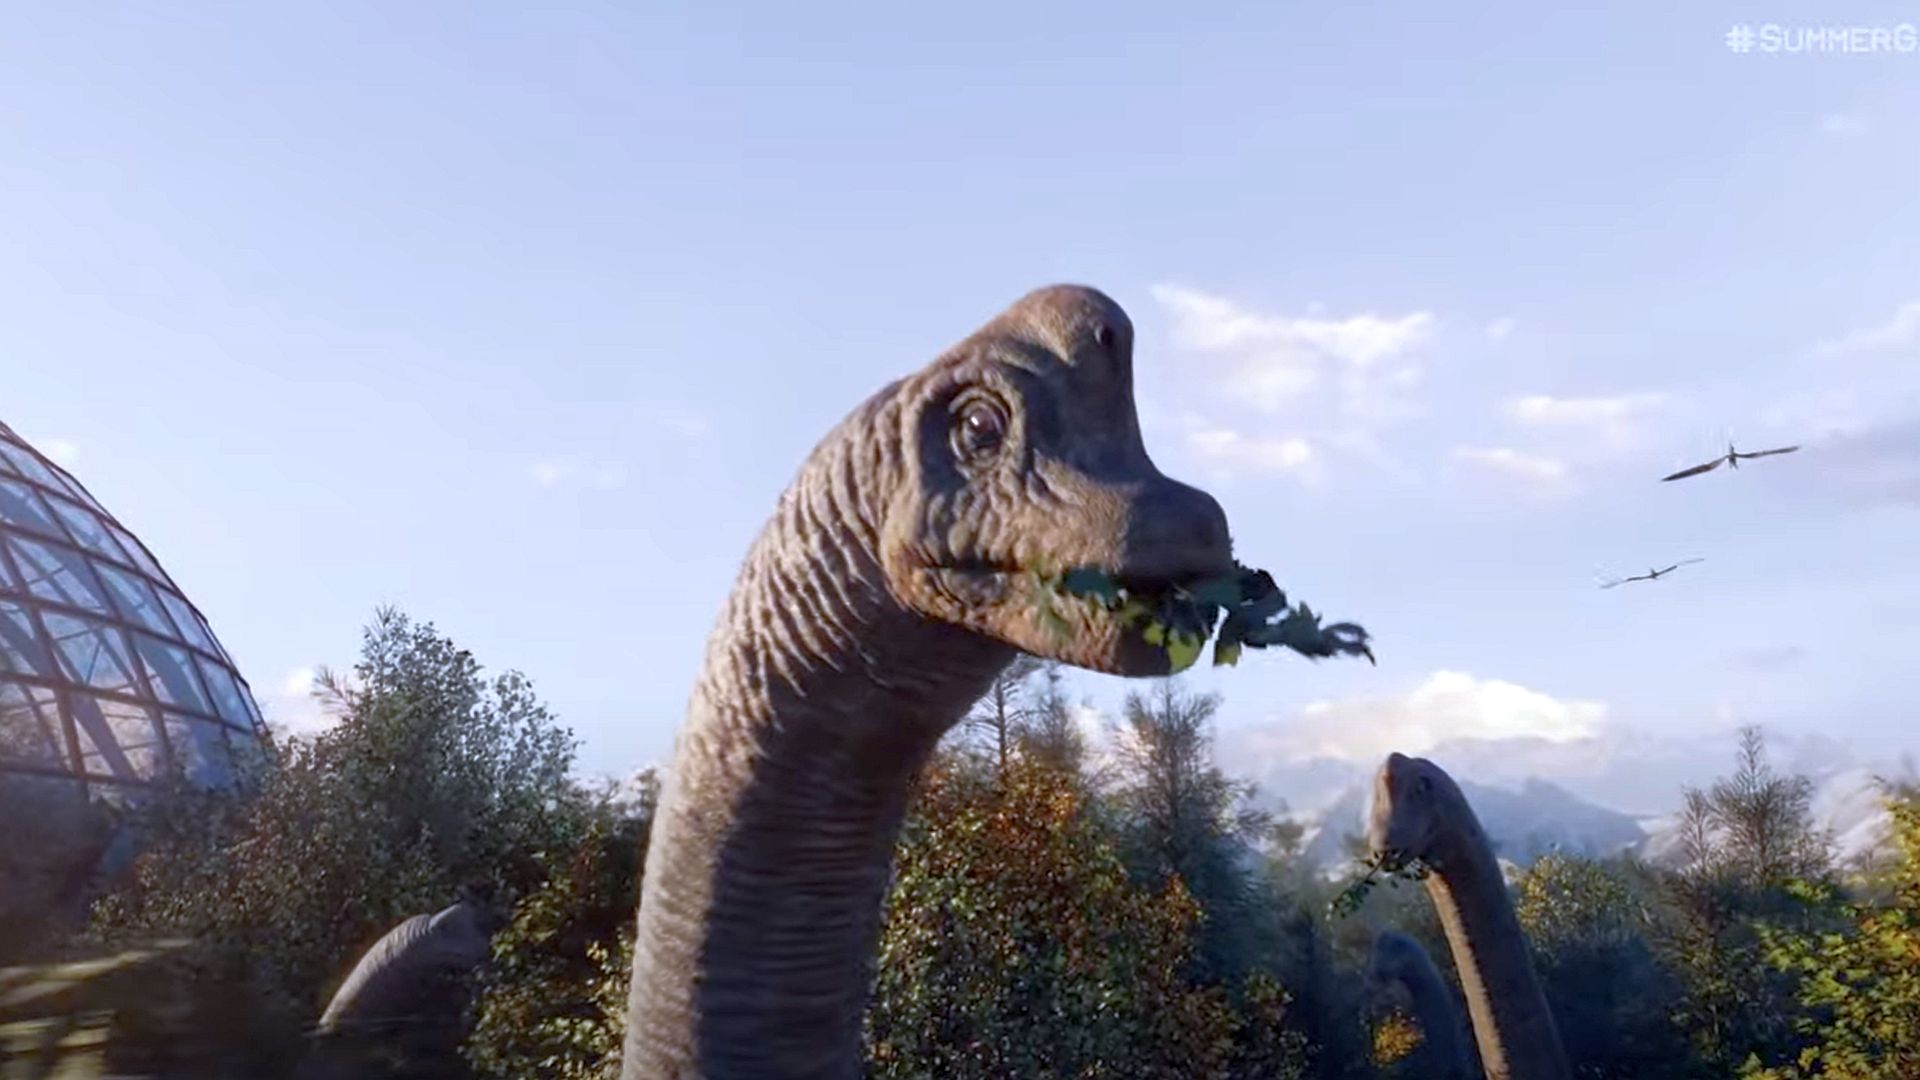 Jurassic World Evolution 2 comes to Steam this year